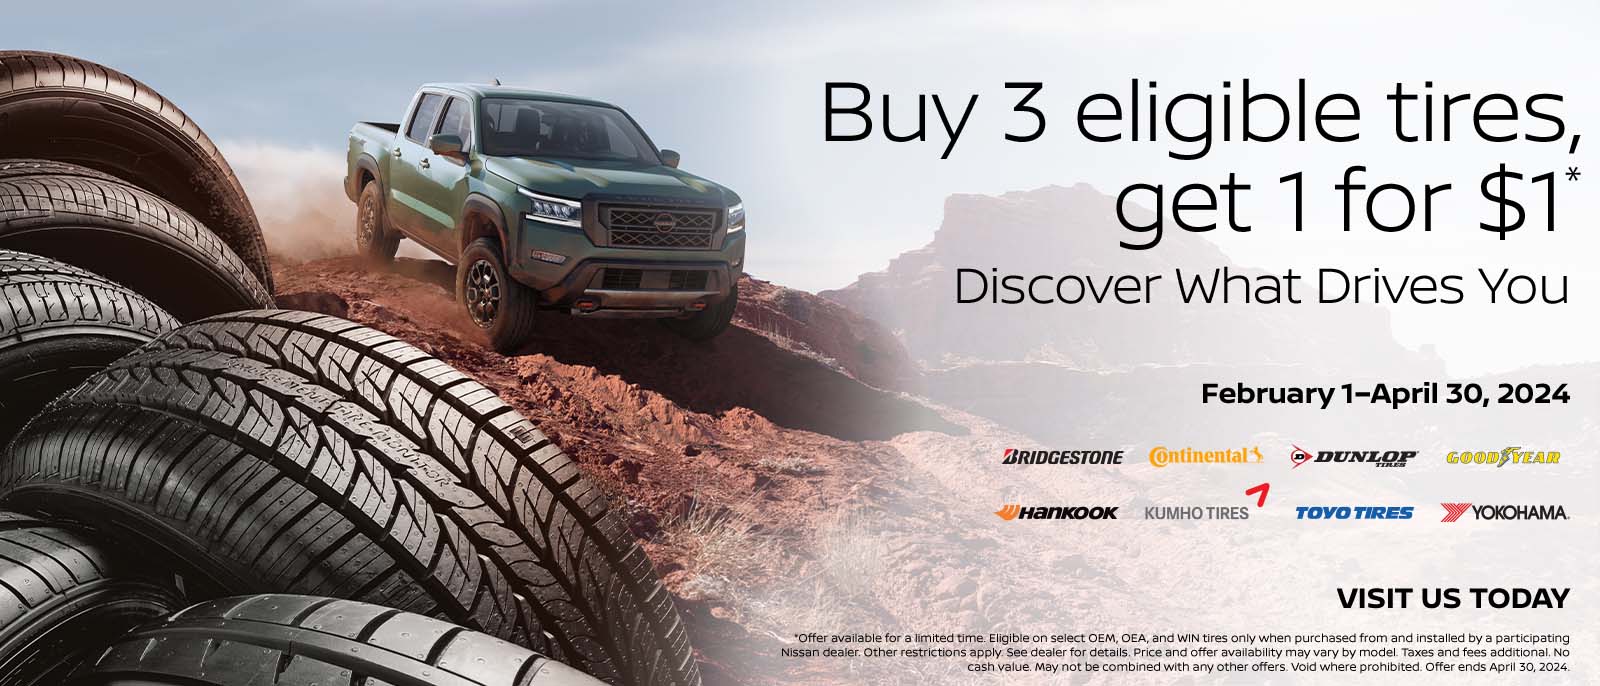 Buy 3 eligible tires get 1 for $1